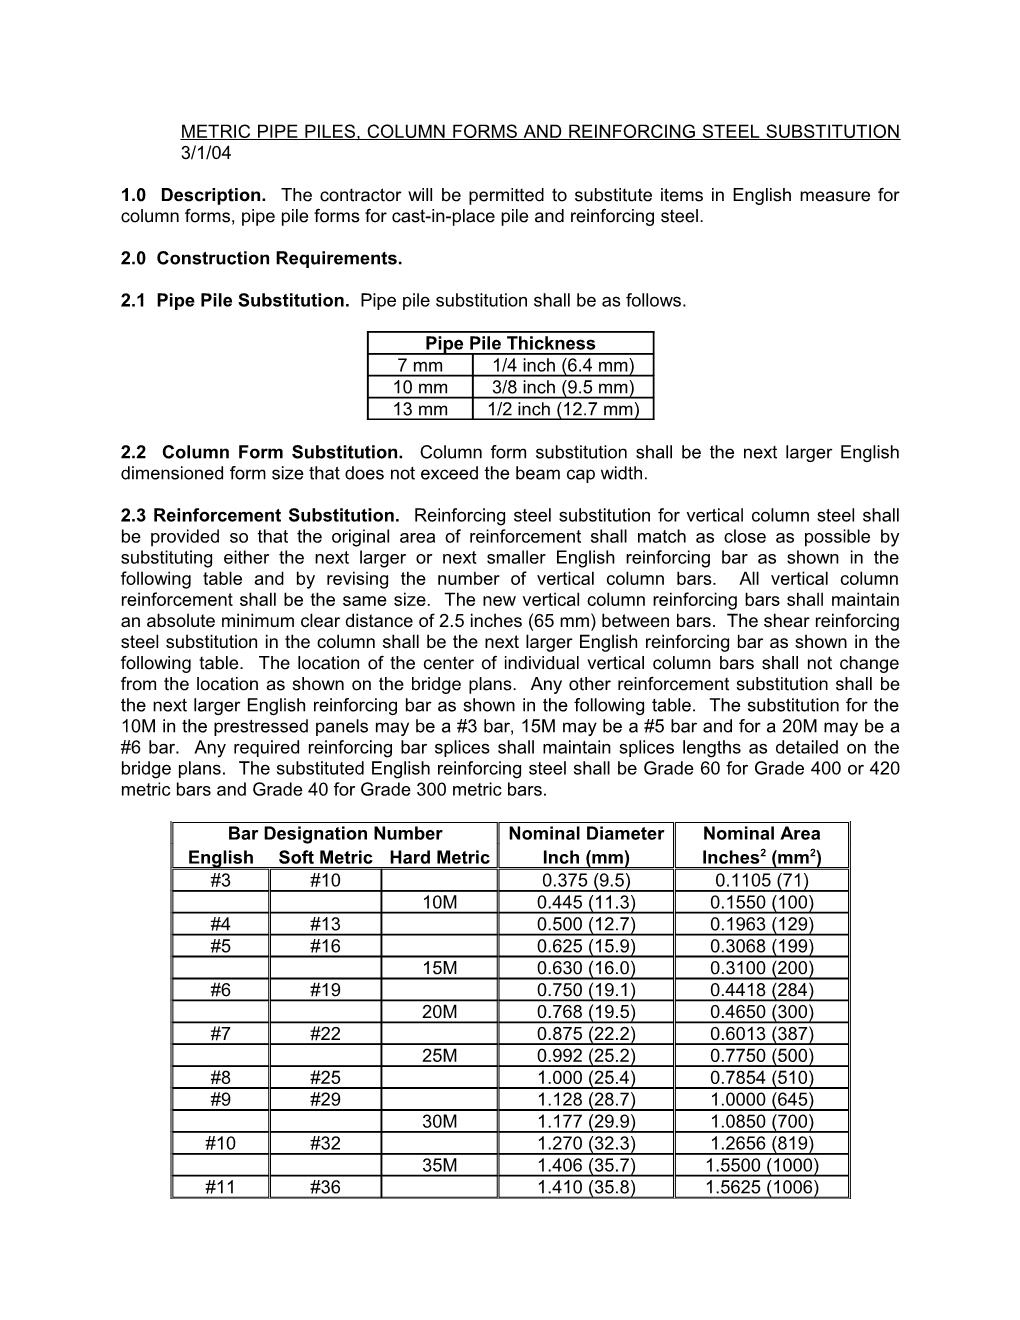 Metric Pipe Piles, Column Forms and Reinforcing Steel Substitution 3/1/04